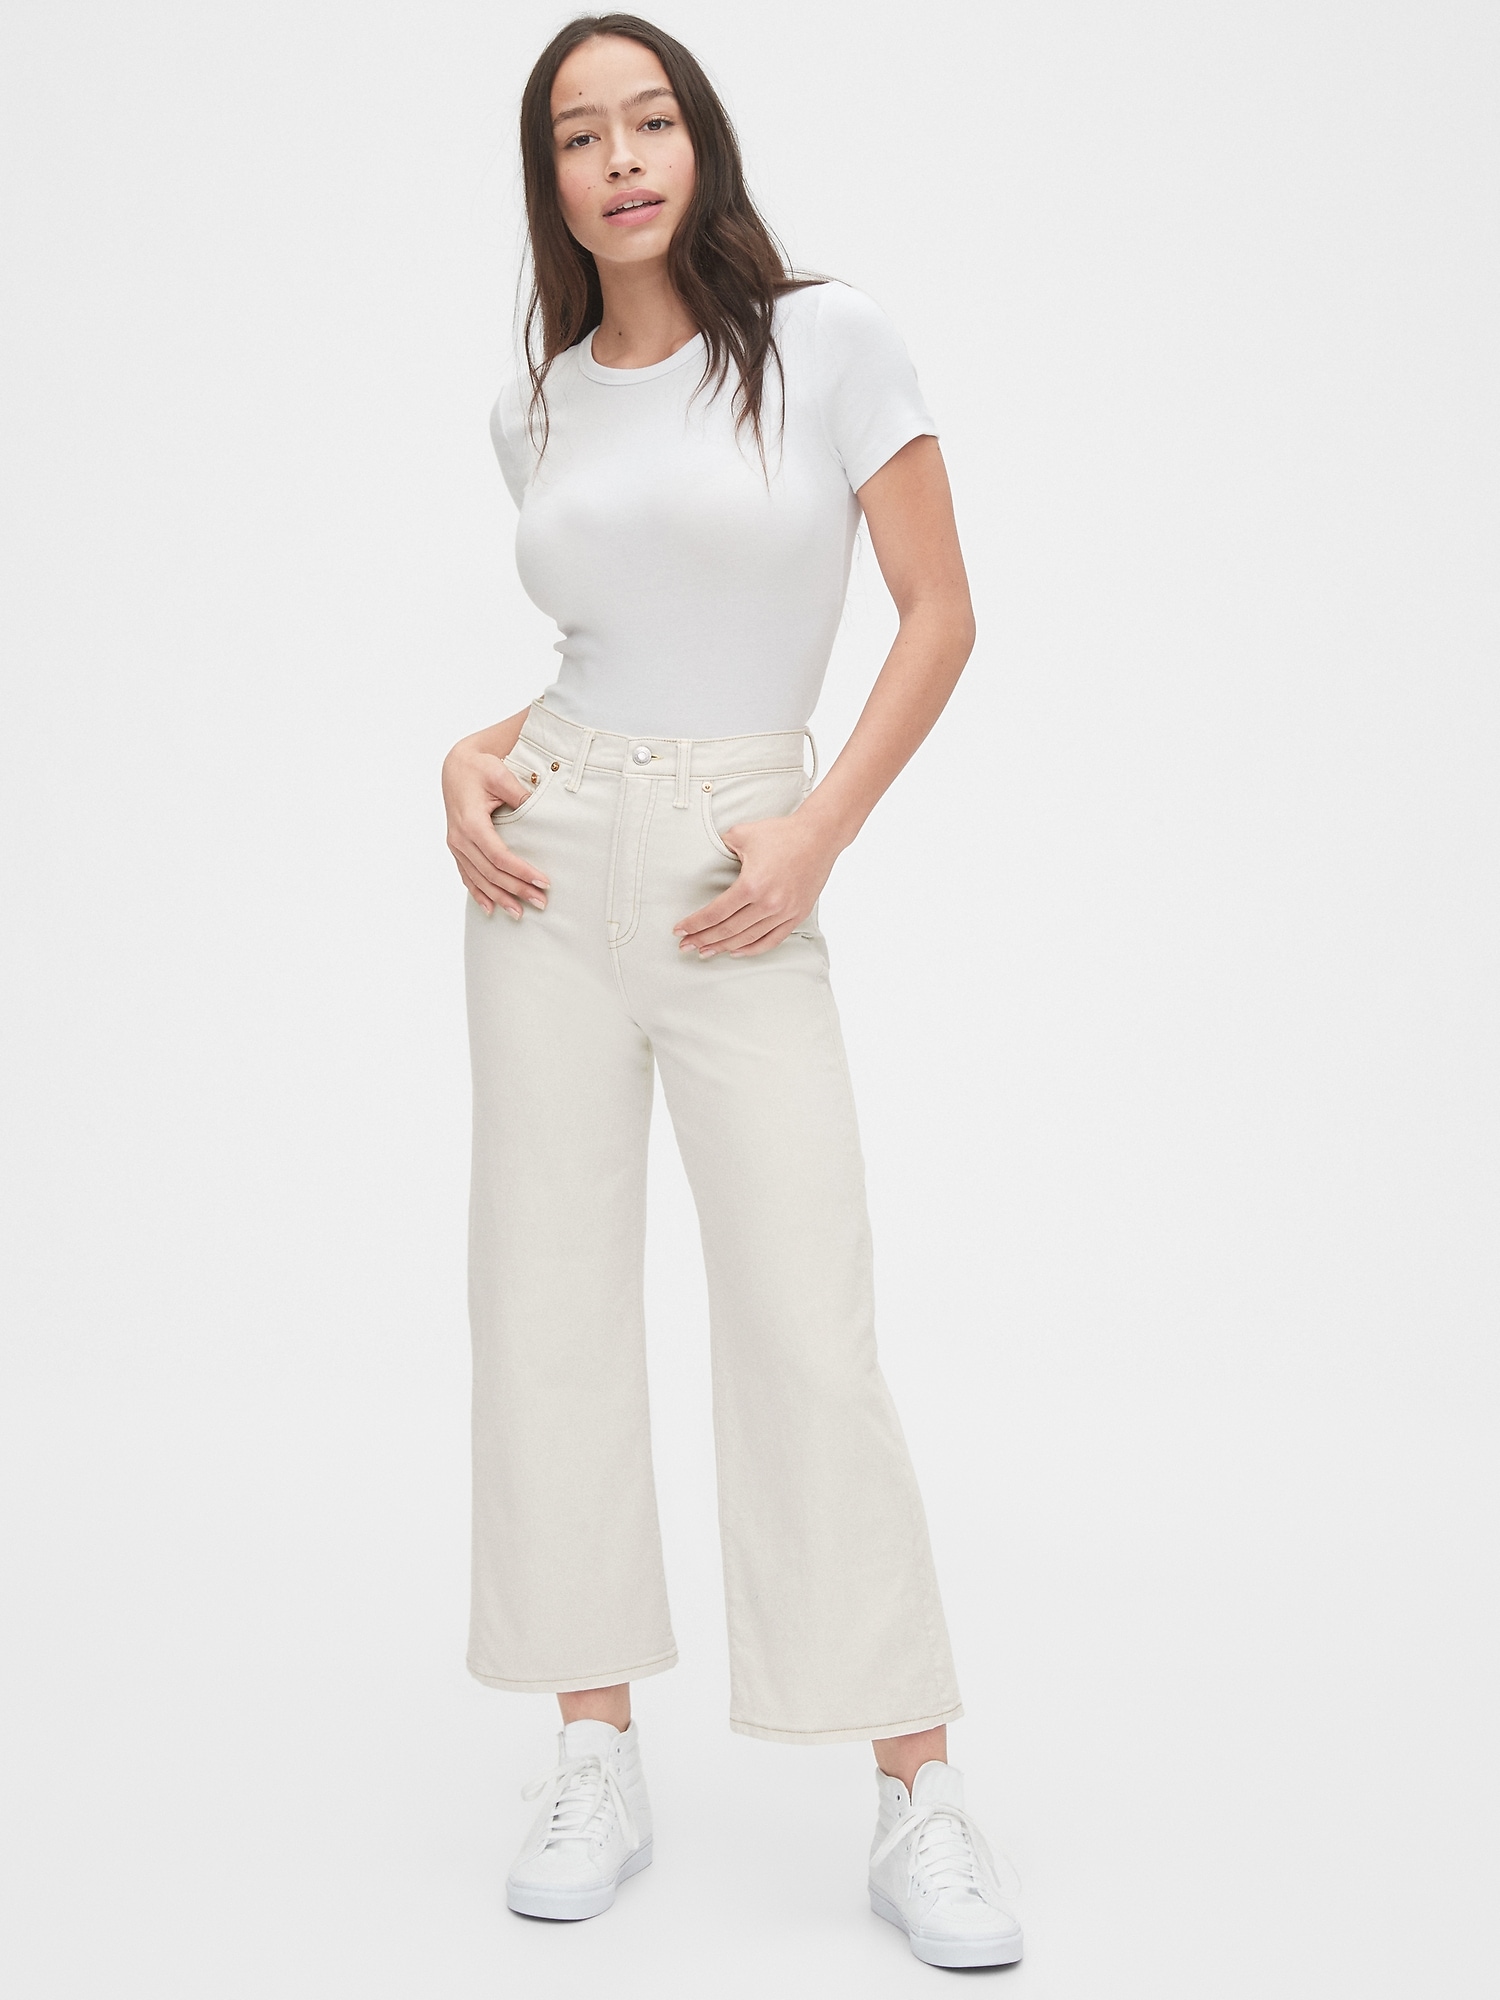 gap high waisted white jeans